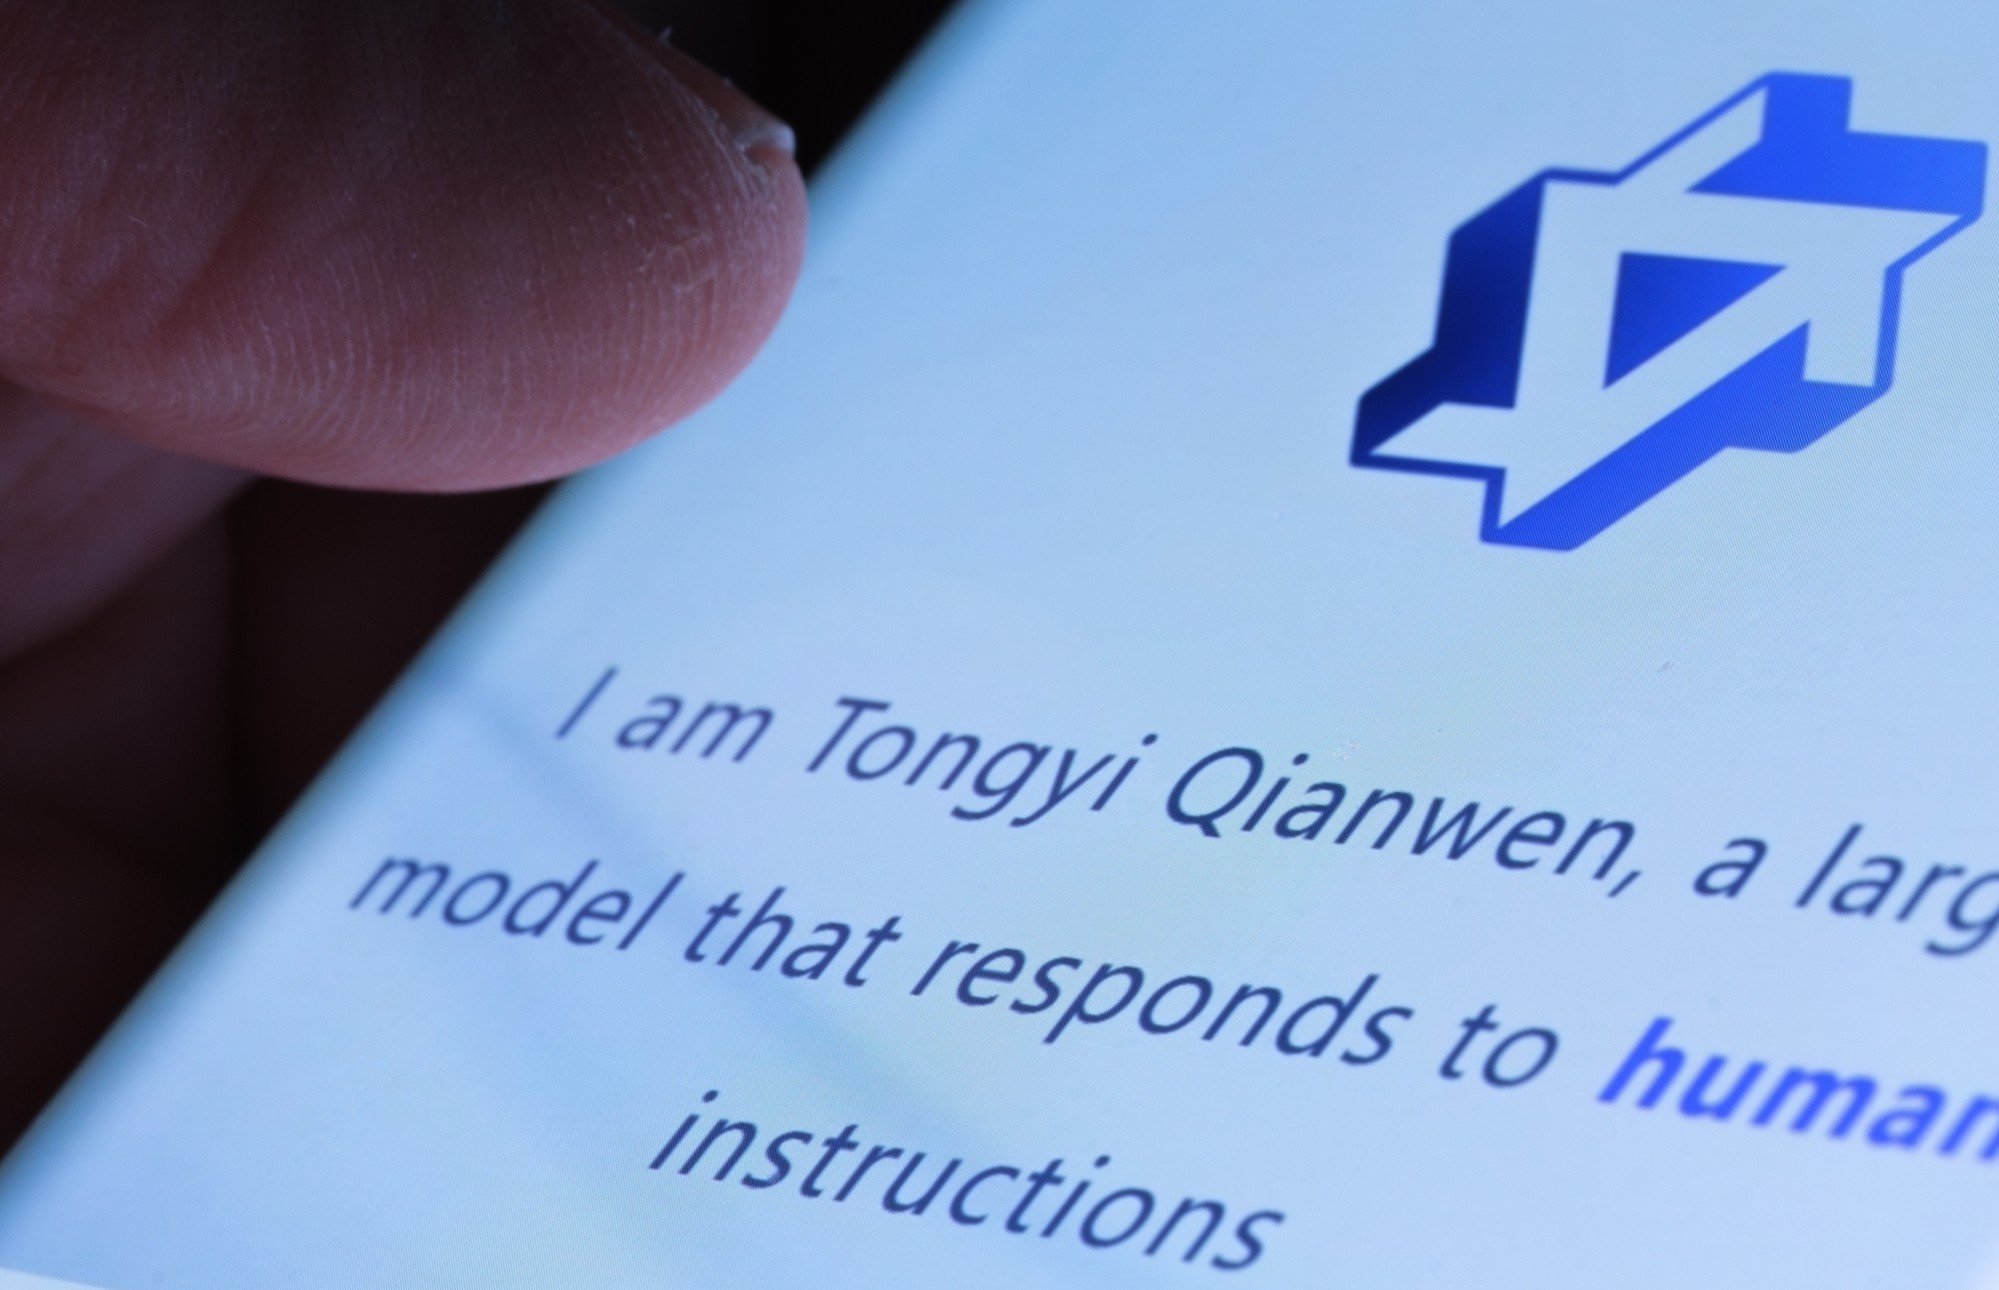 The Tongyi Qianwen large language models, developed and operated by Alibaba Group Holding’s cloud computing unit, are used in industries ranging from consumer electronics to cars and online games. Photo: Shutterstock